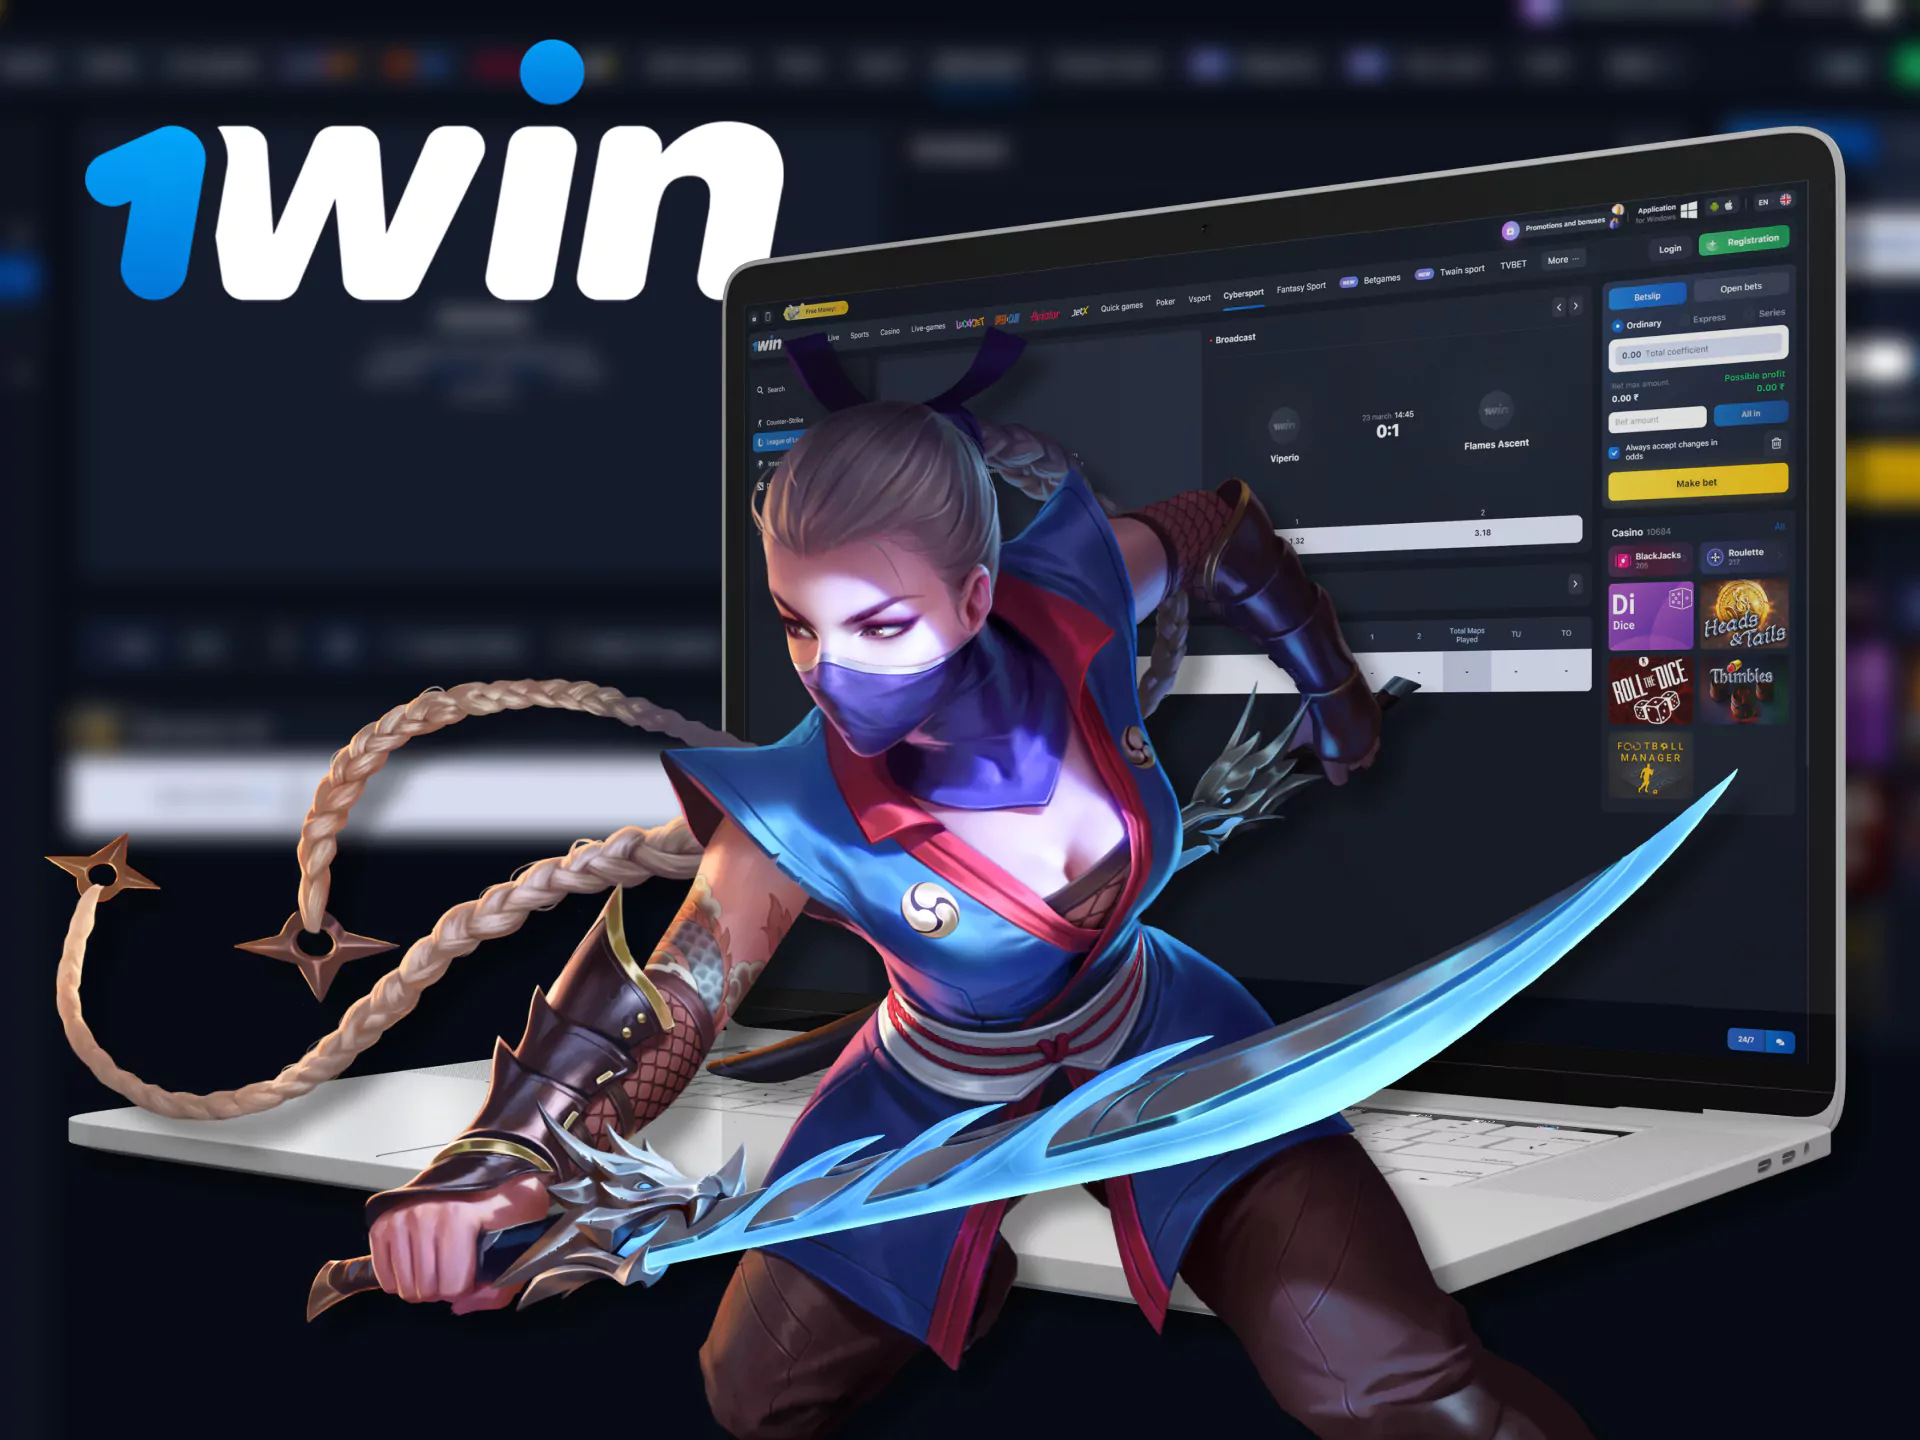 At 1Win you can quickly and easily learn how to bet on League of Legends games.